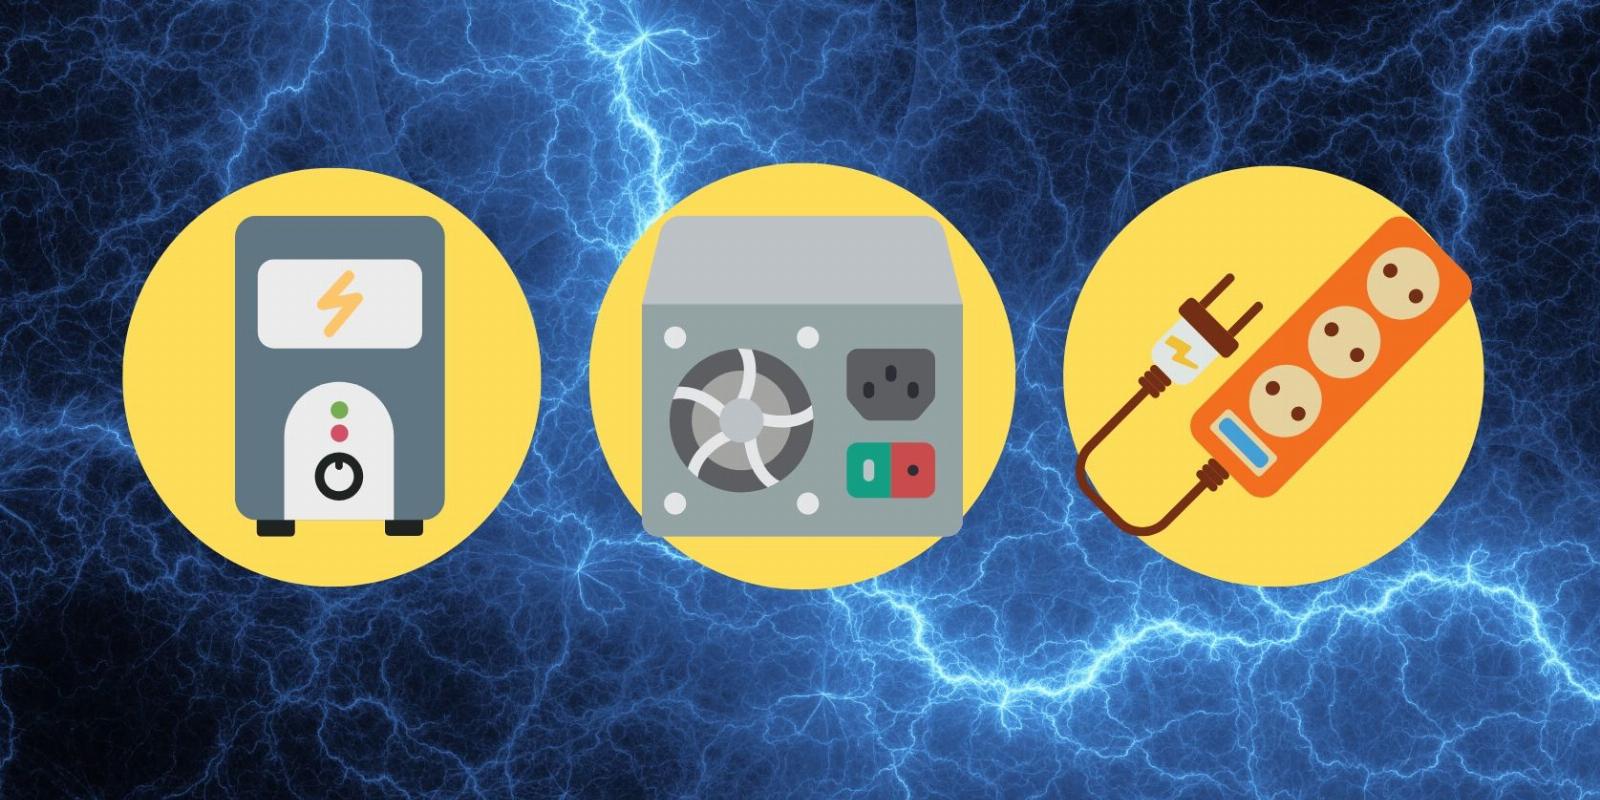 Surge Protector vs. UPS vs. AVR: What’s the Difference?